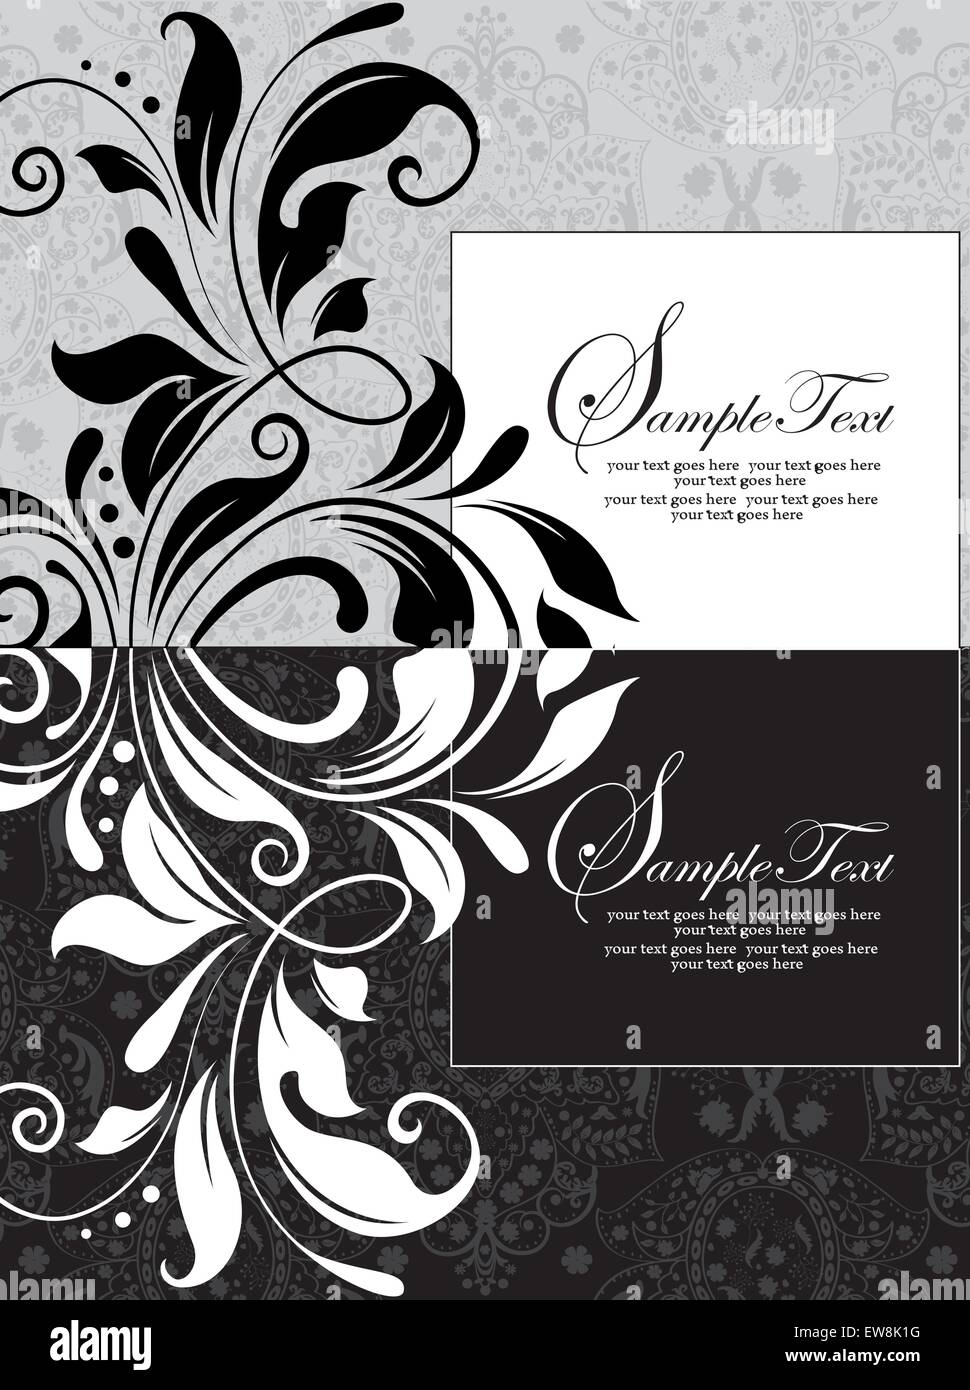 Vintage invitation card with ornate elegant abstract floral design, black, white and gray. Vector illustration. Stock Vector